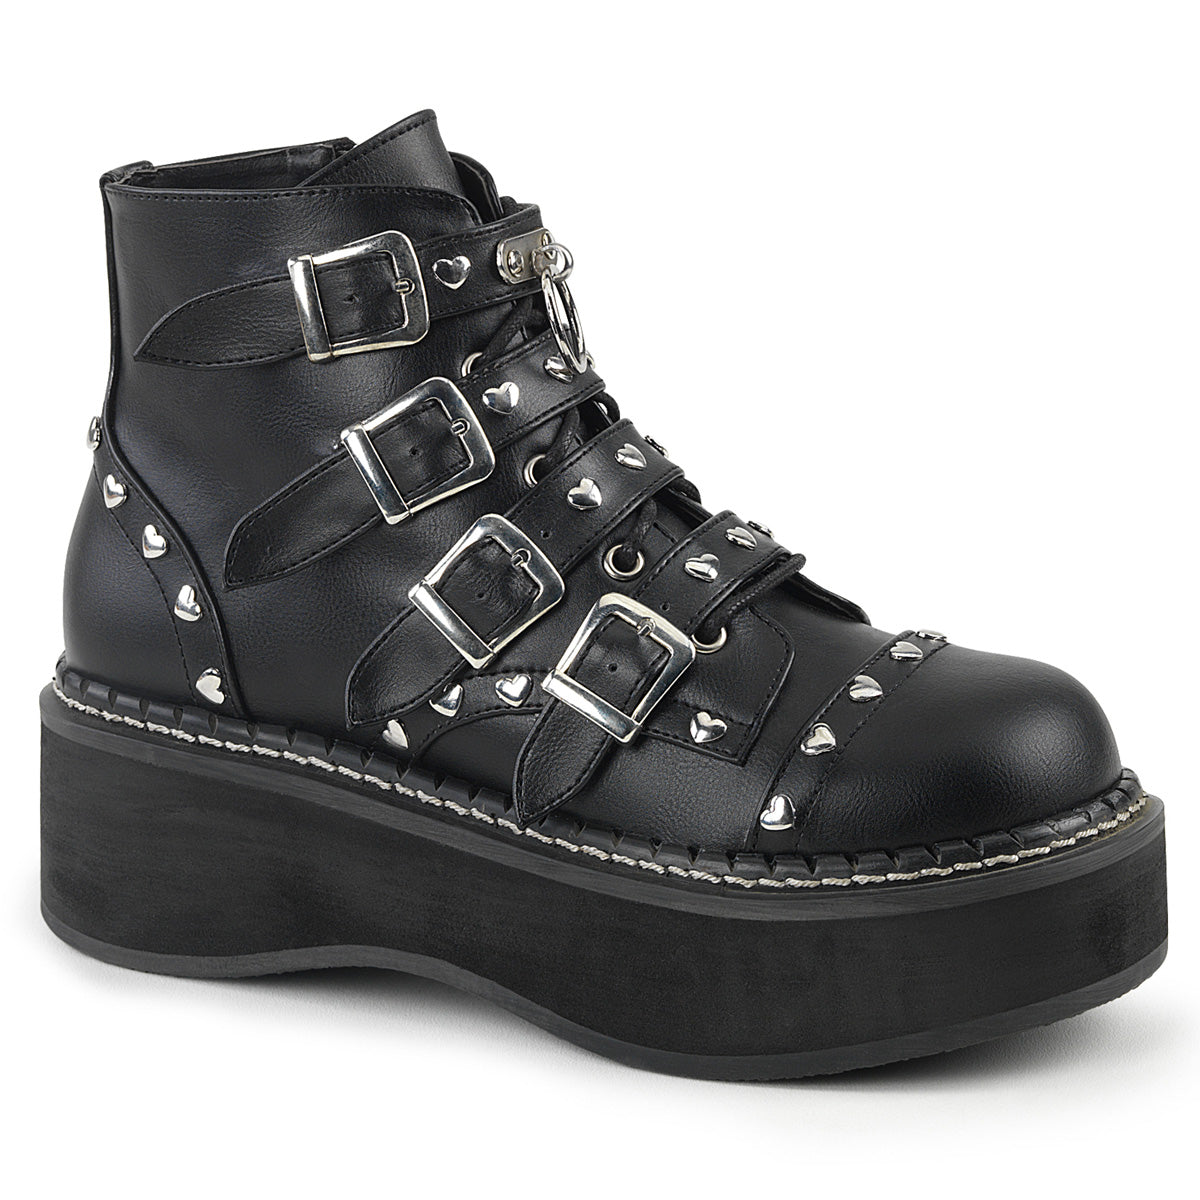 EMILY-315 Black Ankle Boots